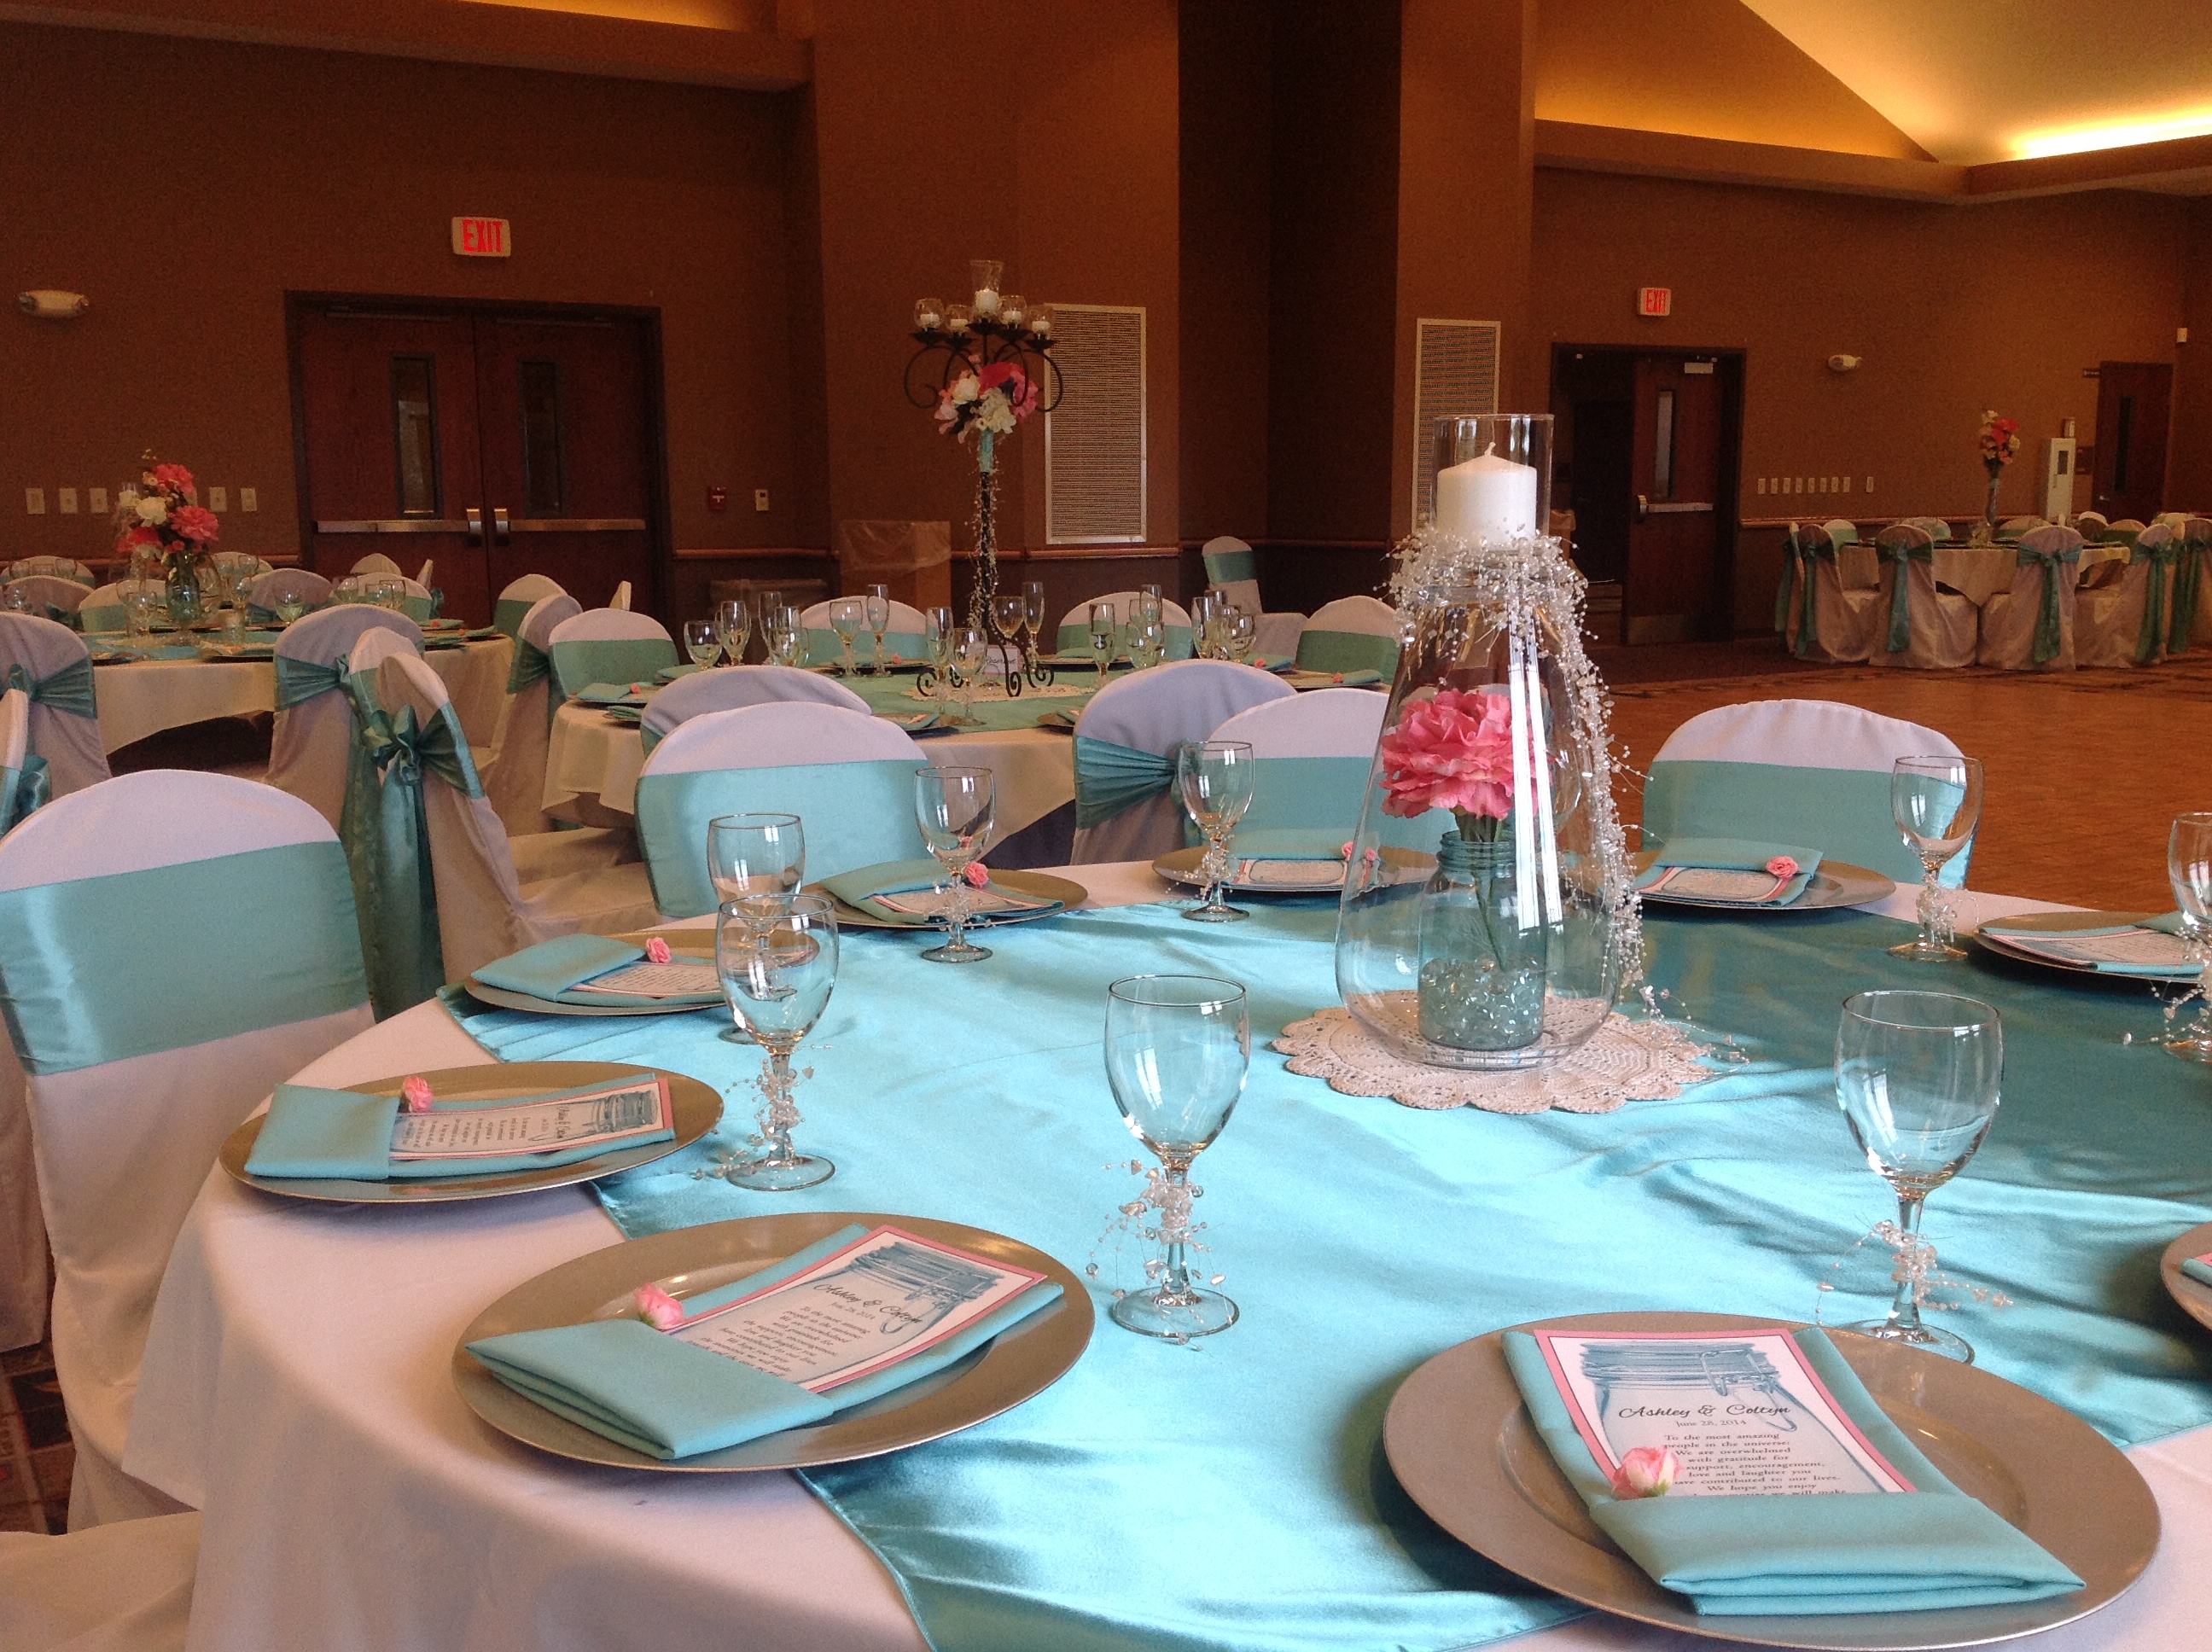 Close-up view of table settings